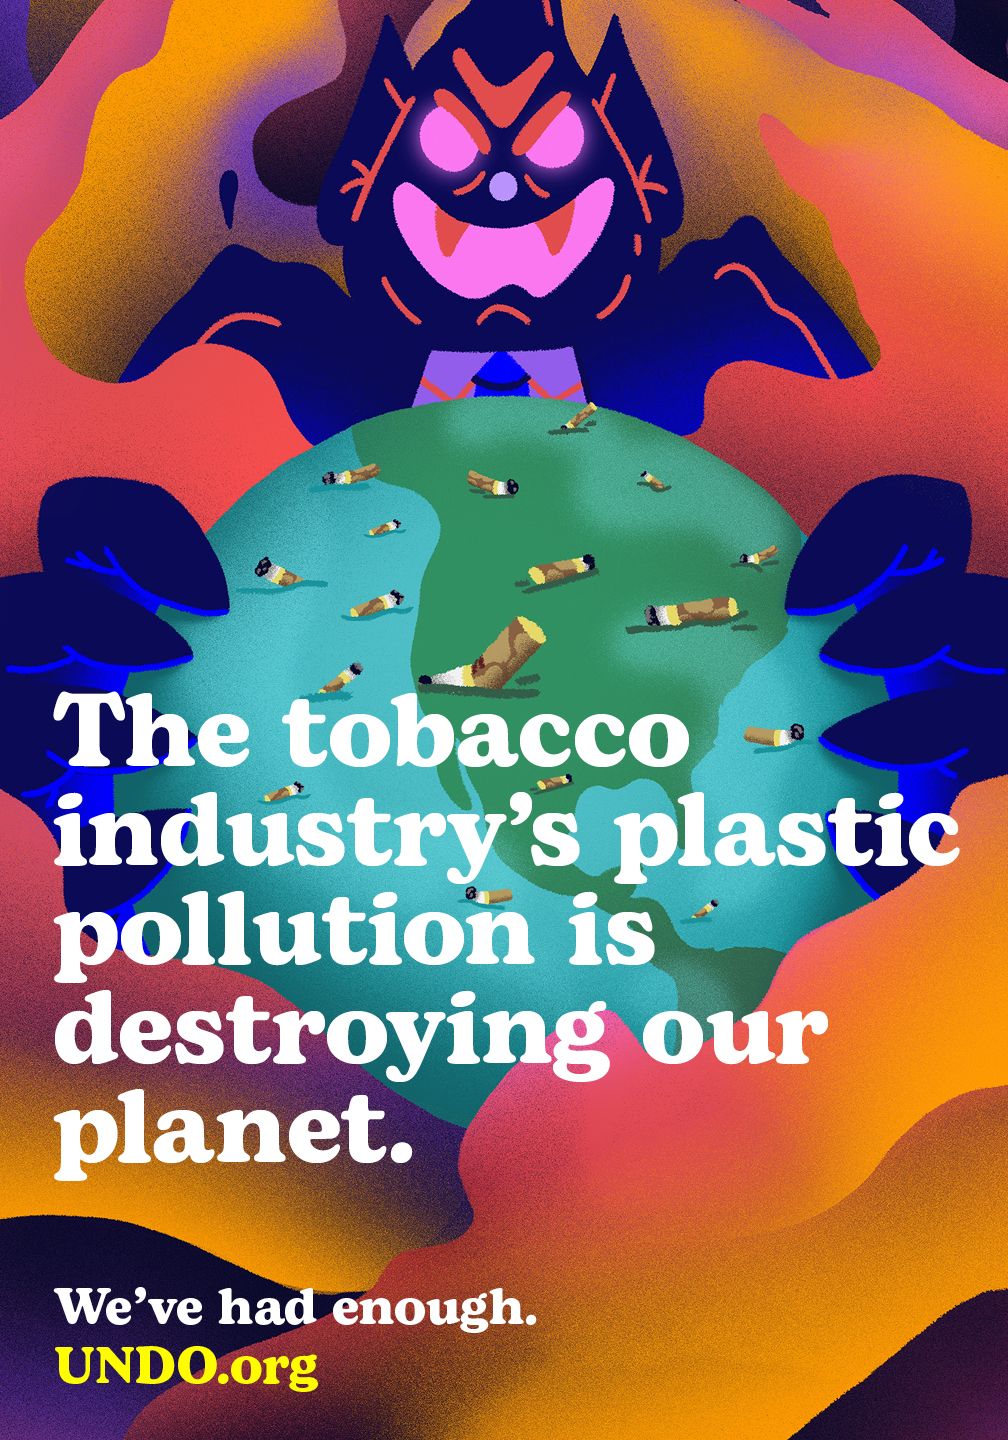 Orange, yellow, pink background animation graphic of a large sinister man in a suit holding the Earth covered in cigarette butts and laughing diabolically with white text reading: The tobacco industry’s plastic pollution is destroying our planet. We’ve had enough. UNDO.org